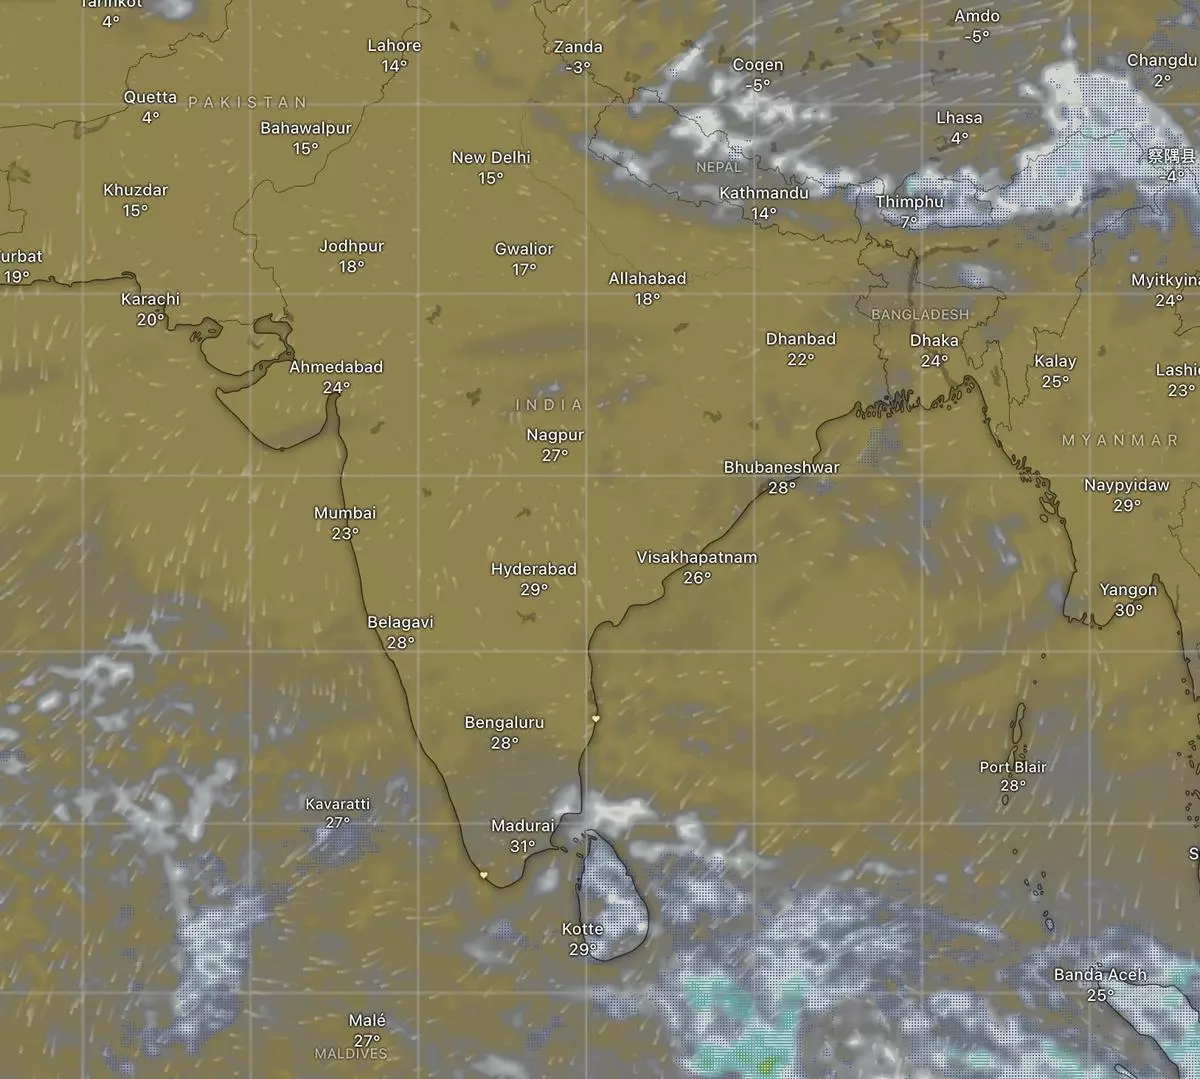 North-West India remains cloudless on Monday morning representing cold but sunny conditions while clouds from the Bay of Bengal are seen drifting towards Sri Lanka and South-East Tamil Nadu as depicted by satellite pictures.